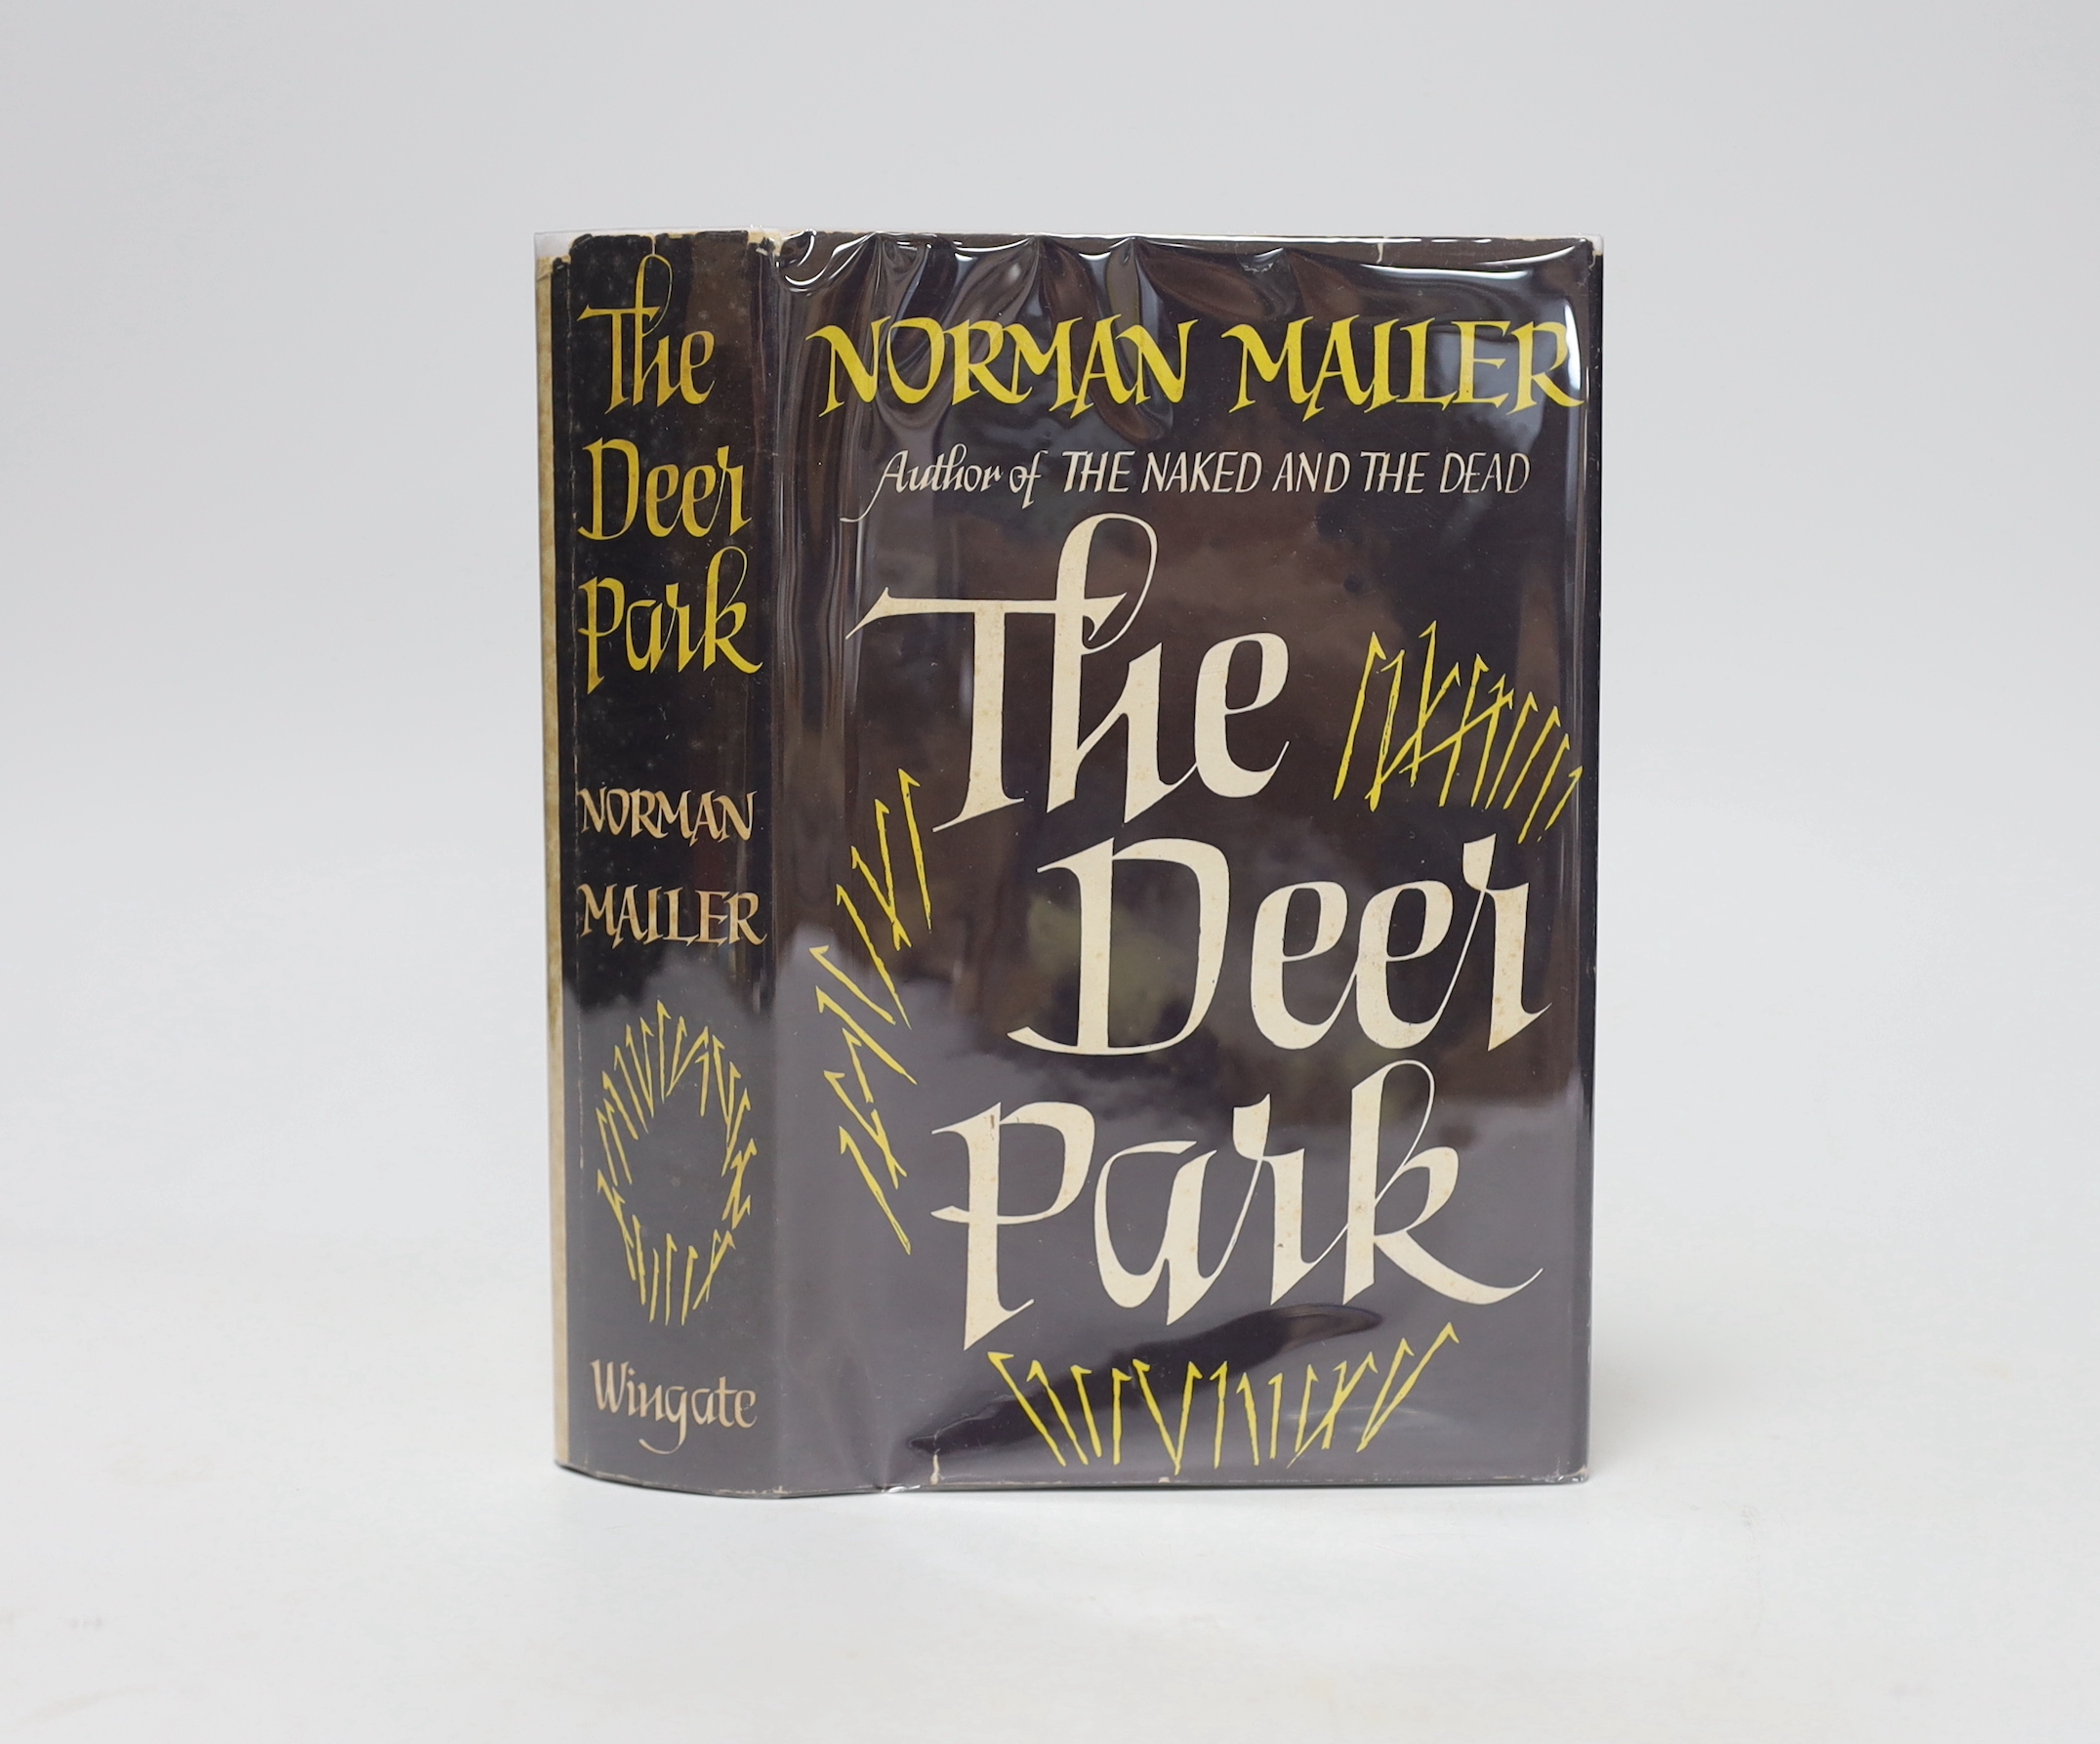 Mailer, Norman - The Deer Park, 1st UK edition, 1st impression, signed by the author to title, publisher’s French blue cloth in unclipped d/j, Allan Wingate, London, 1957